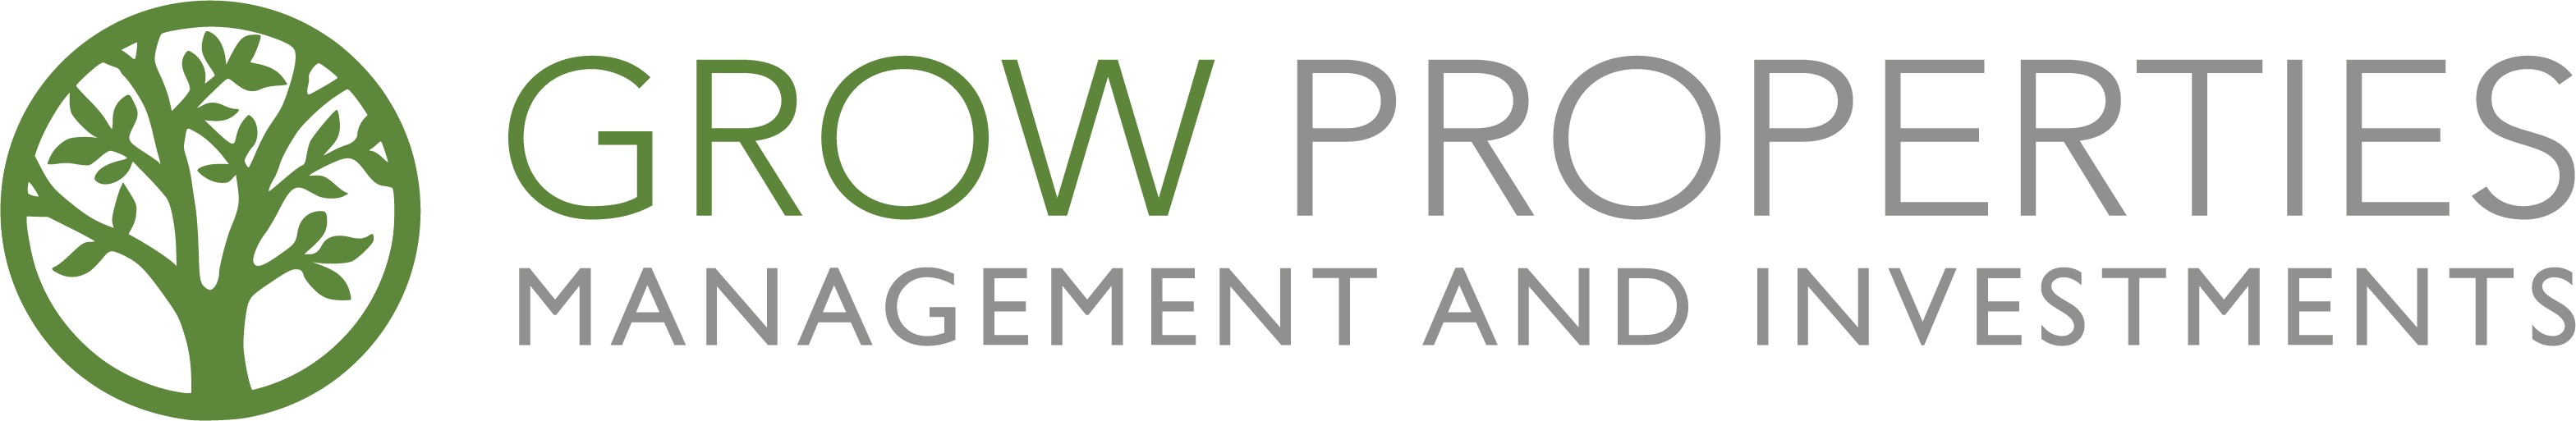 Grow Properties Management and Investments Logo